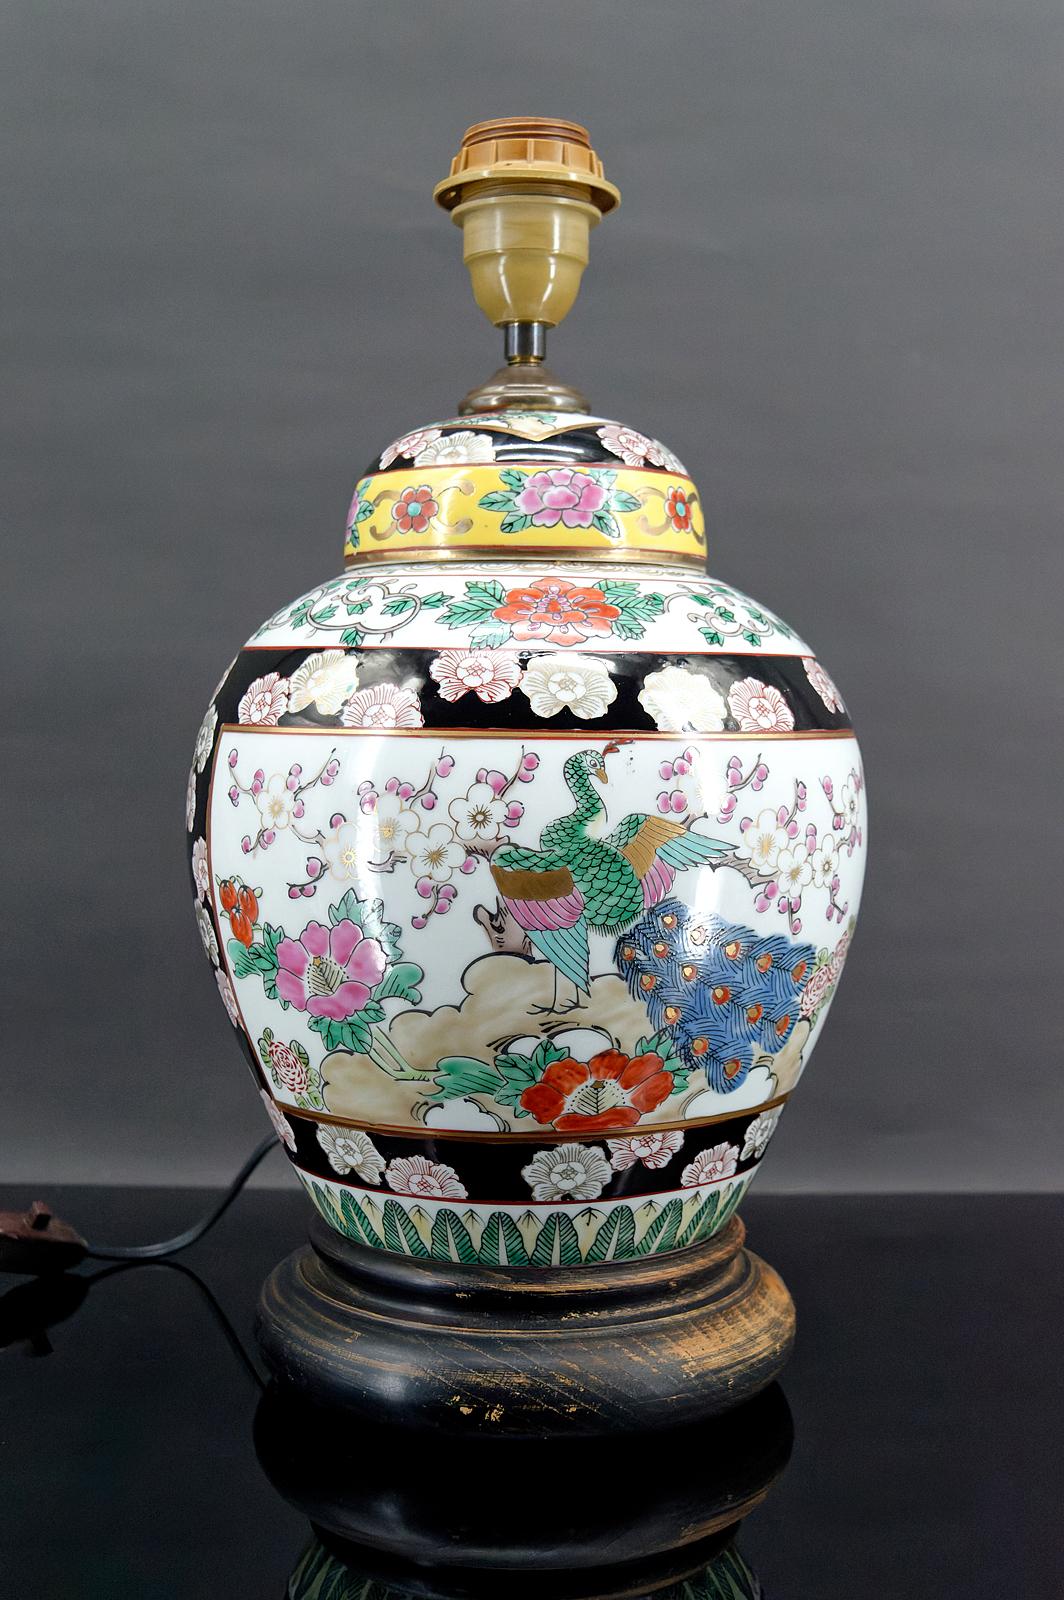 Asian porcelain vase mounted as a lamp.
Floral and animal decor: peacocks.
China, first part of the 20th century.
Very good condition, electricity OK.

Dimensions:
Height:40cm
Diameter:21cm